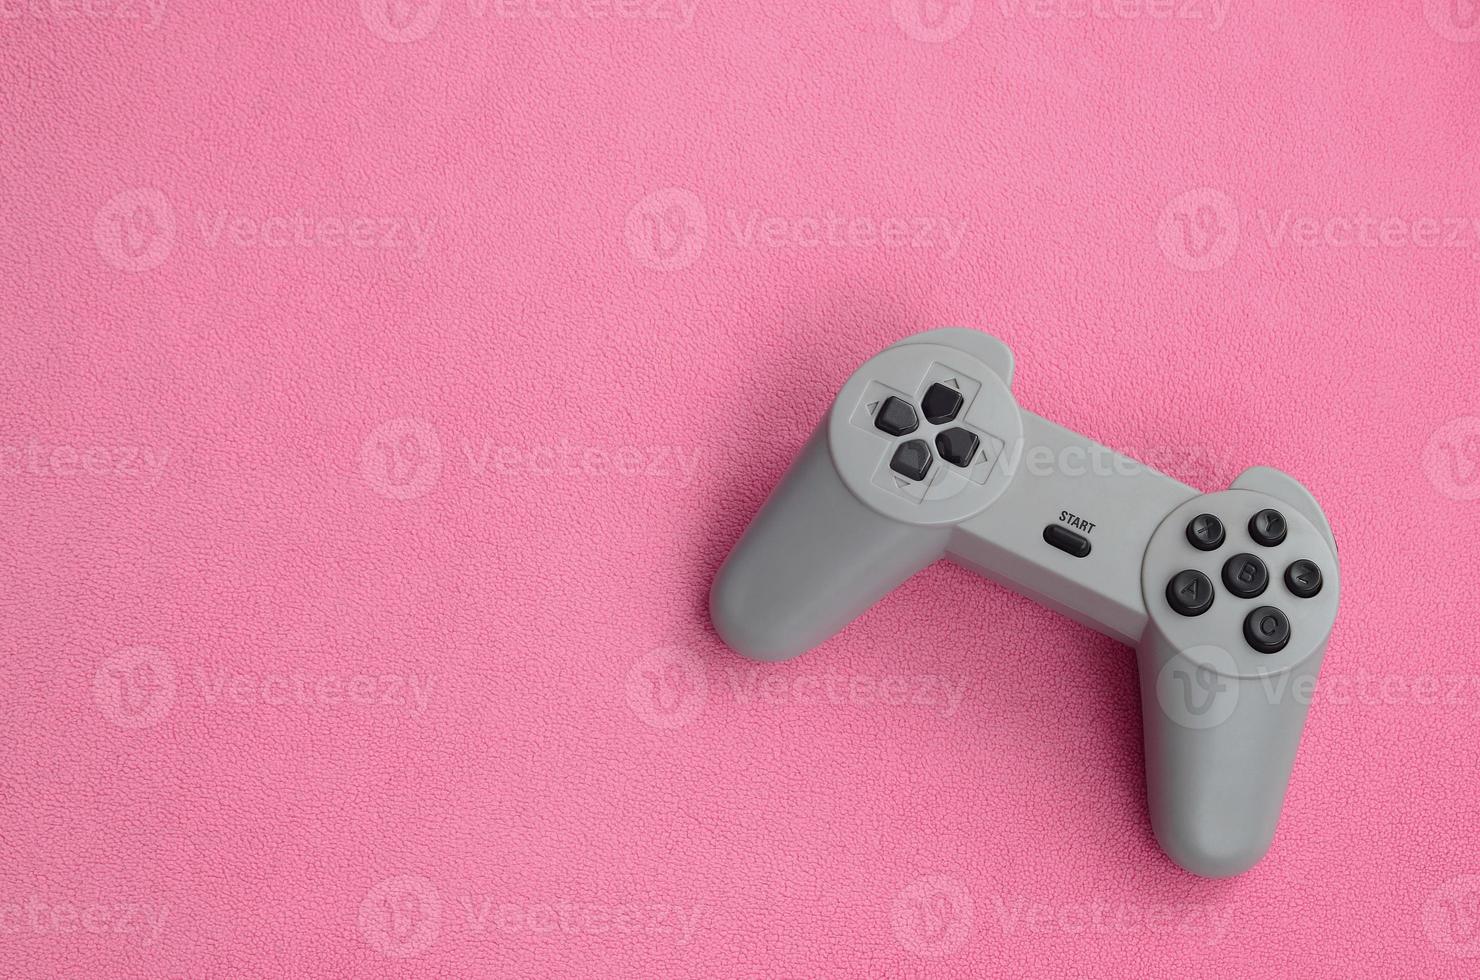 Playing games concept. Single pad joystick lies on the blanket of furry pink fleece fabric. Controller for video games on a background texture of light pink soft plush fleece material photo